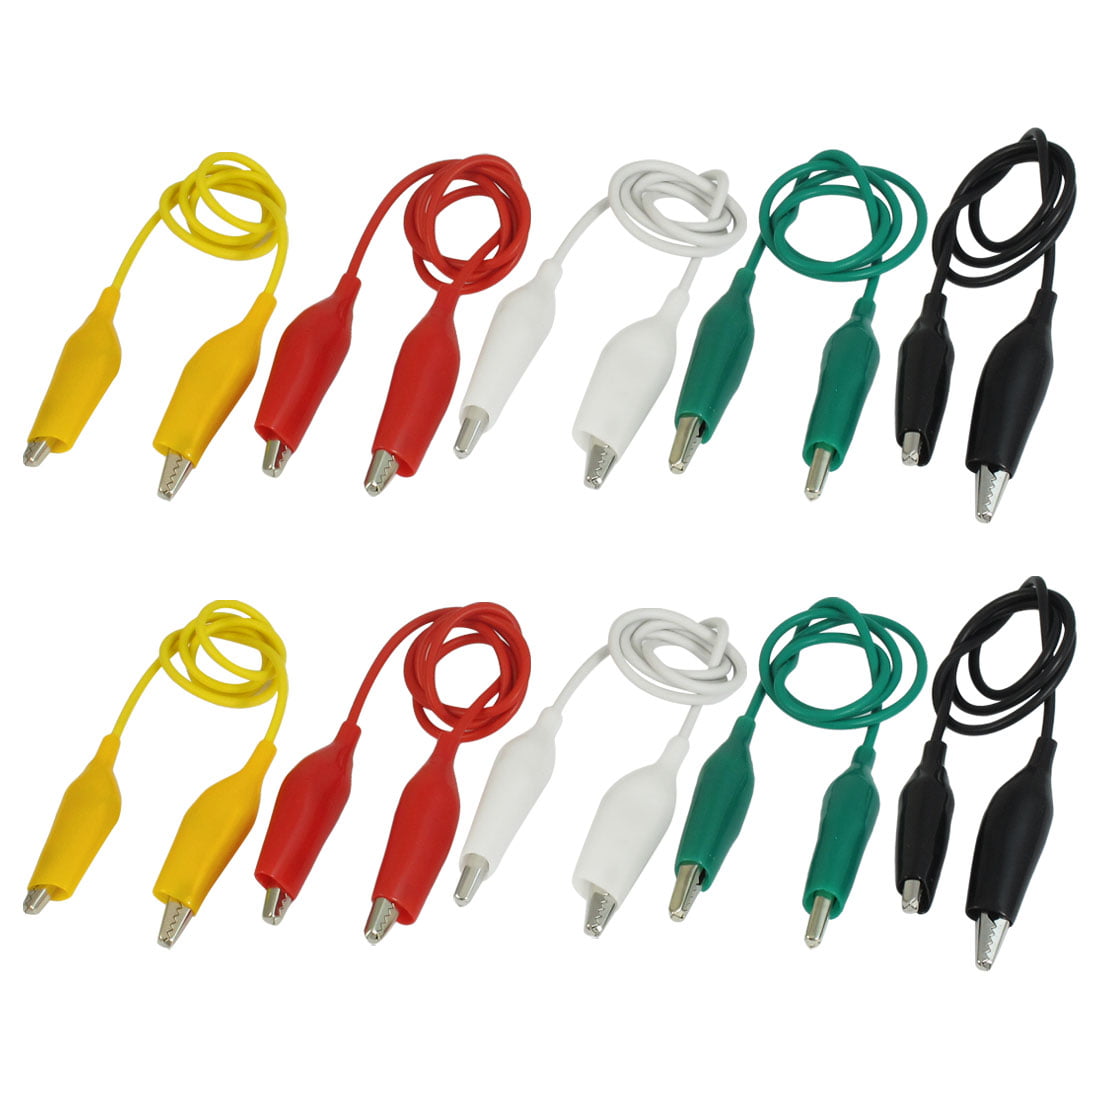 10pcs Colorful Crocodile Clips Cable Double-ended Jumper Test Leads Wire 